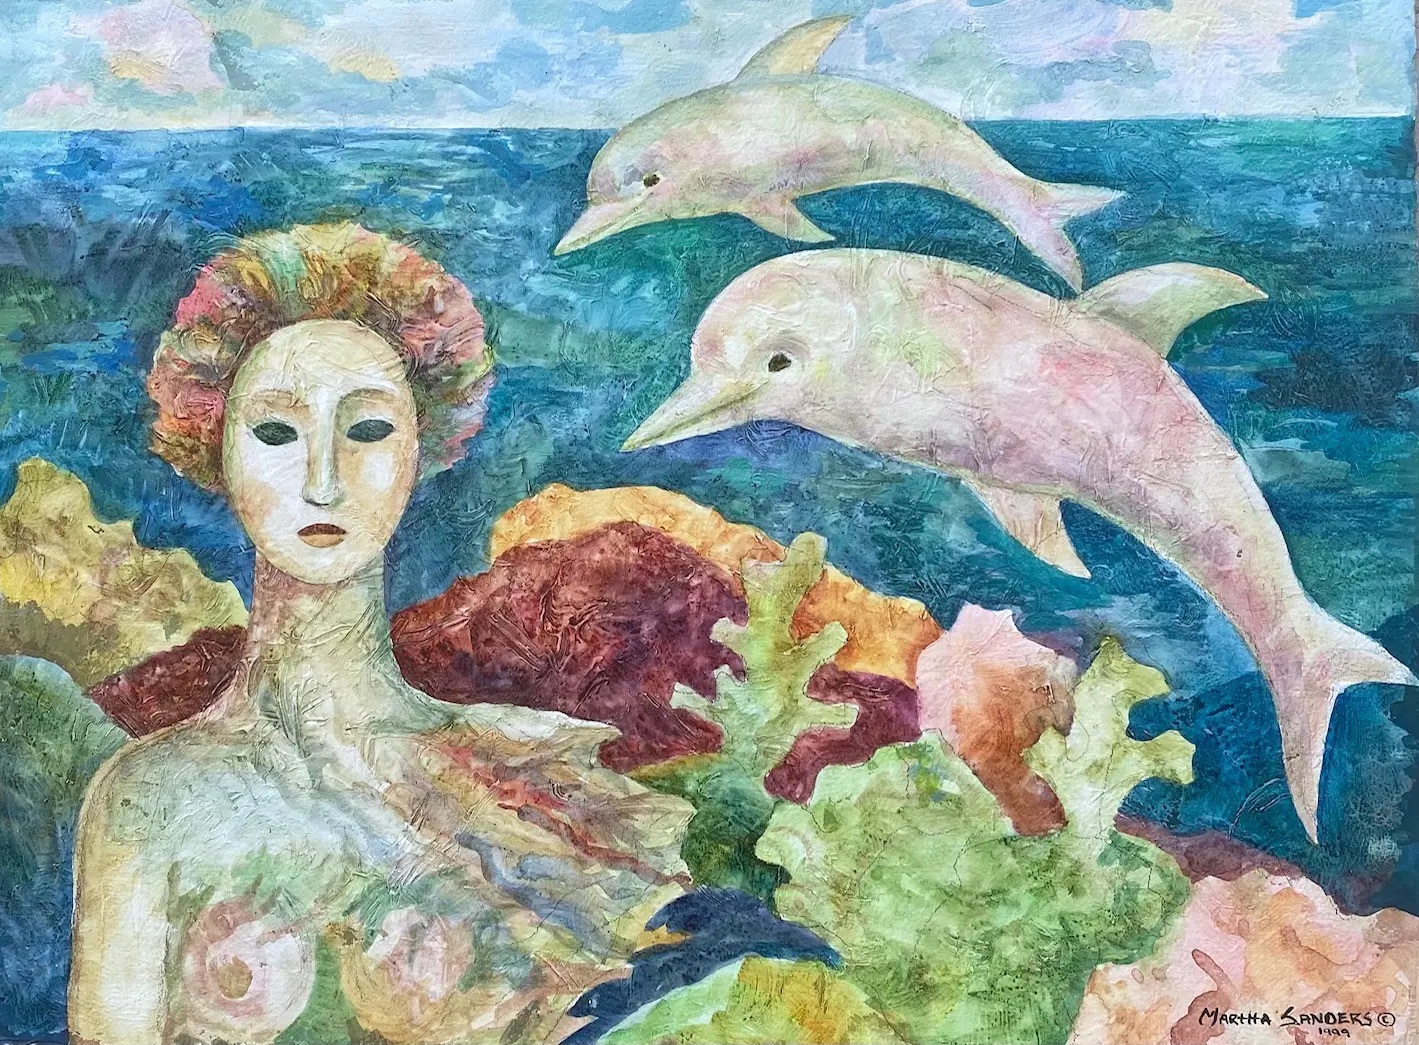 A painting of a woman and dolphins in the ocean.